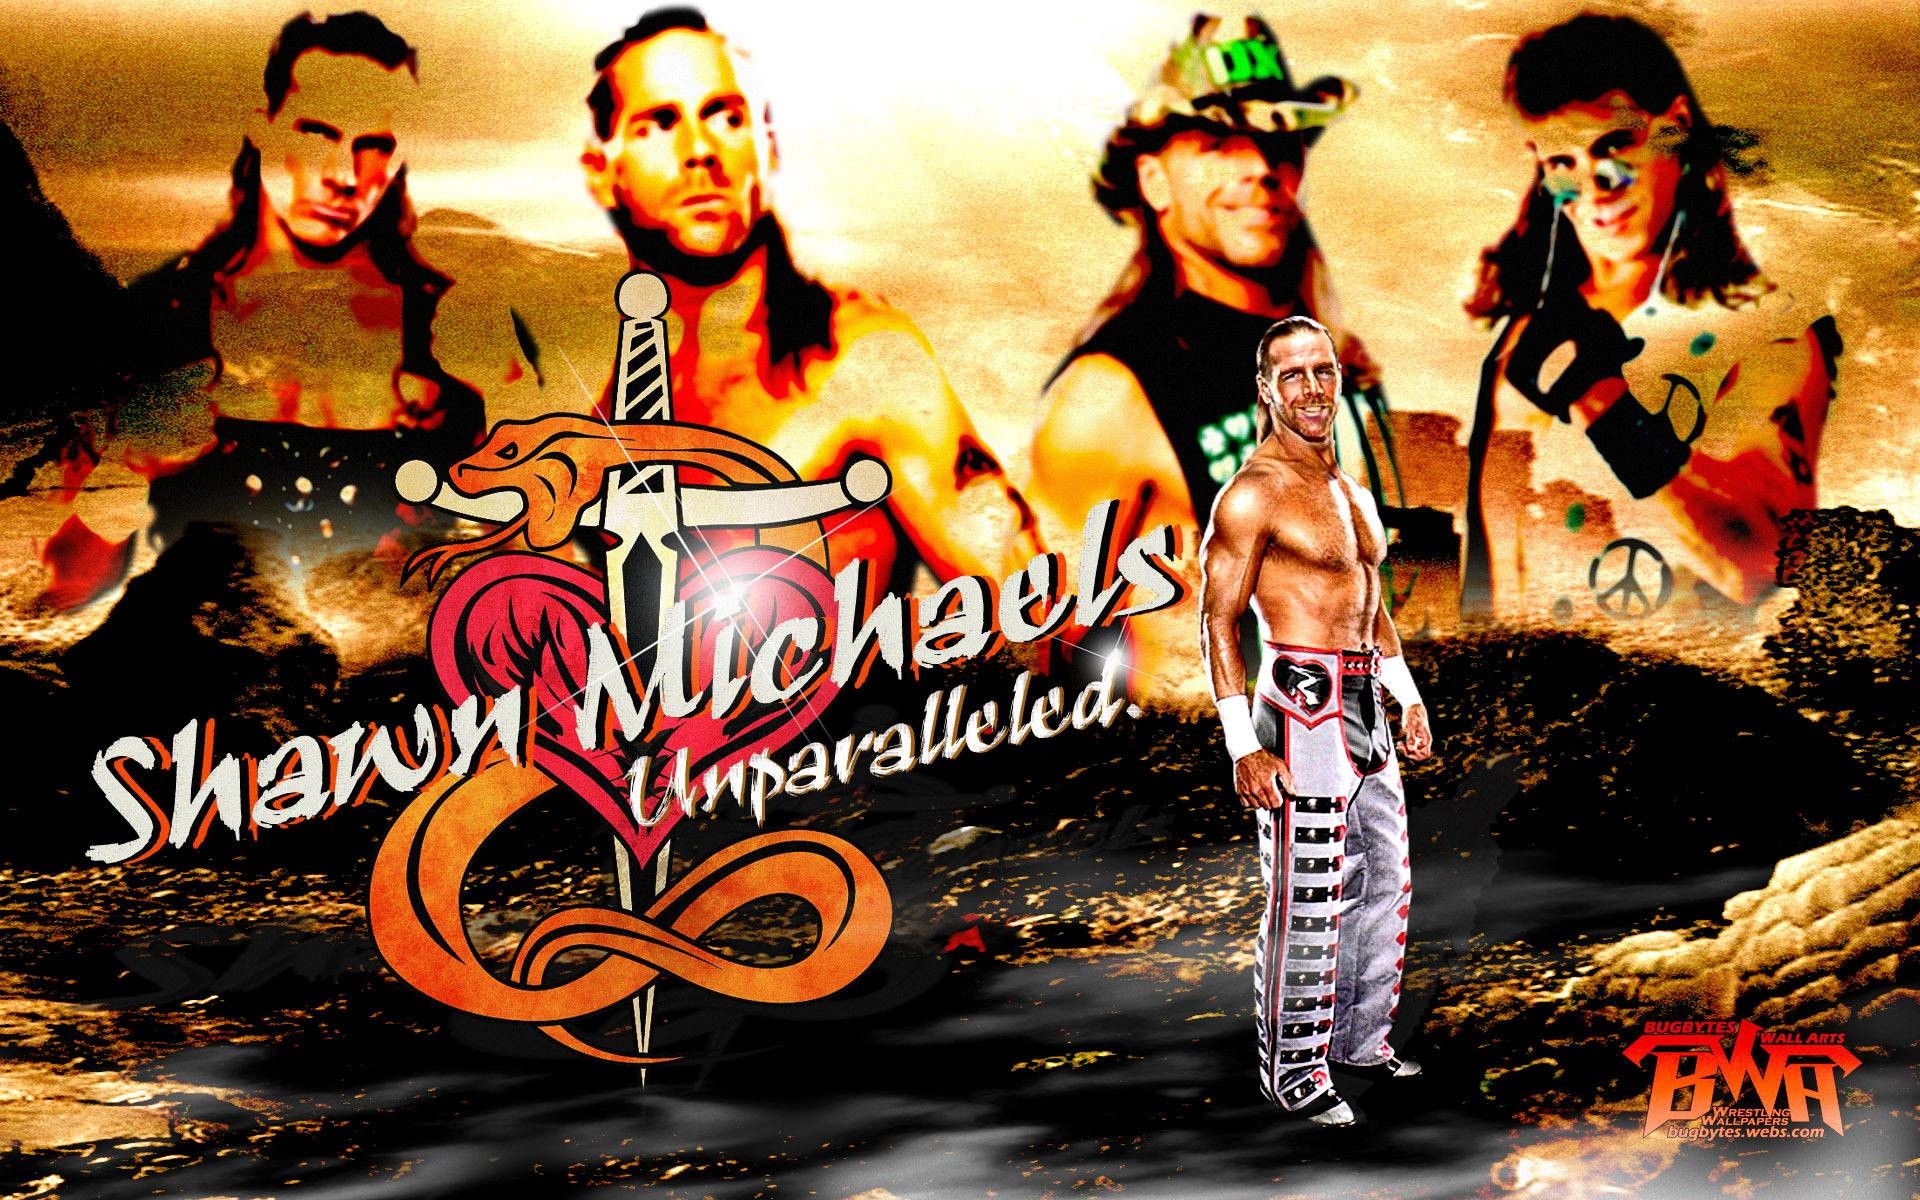 1920x1200 Hbk Pictures 17764 HD Desktop Backgrounds and Widescreen .